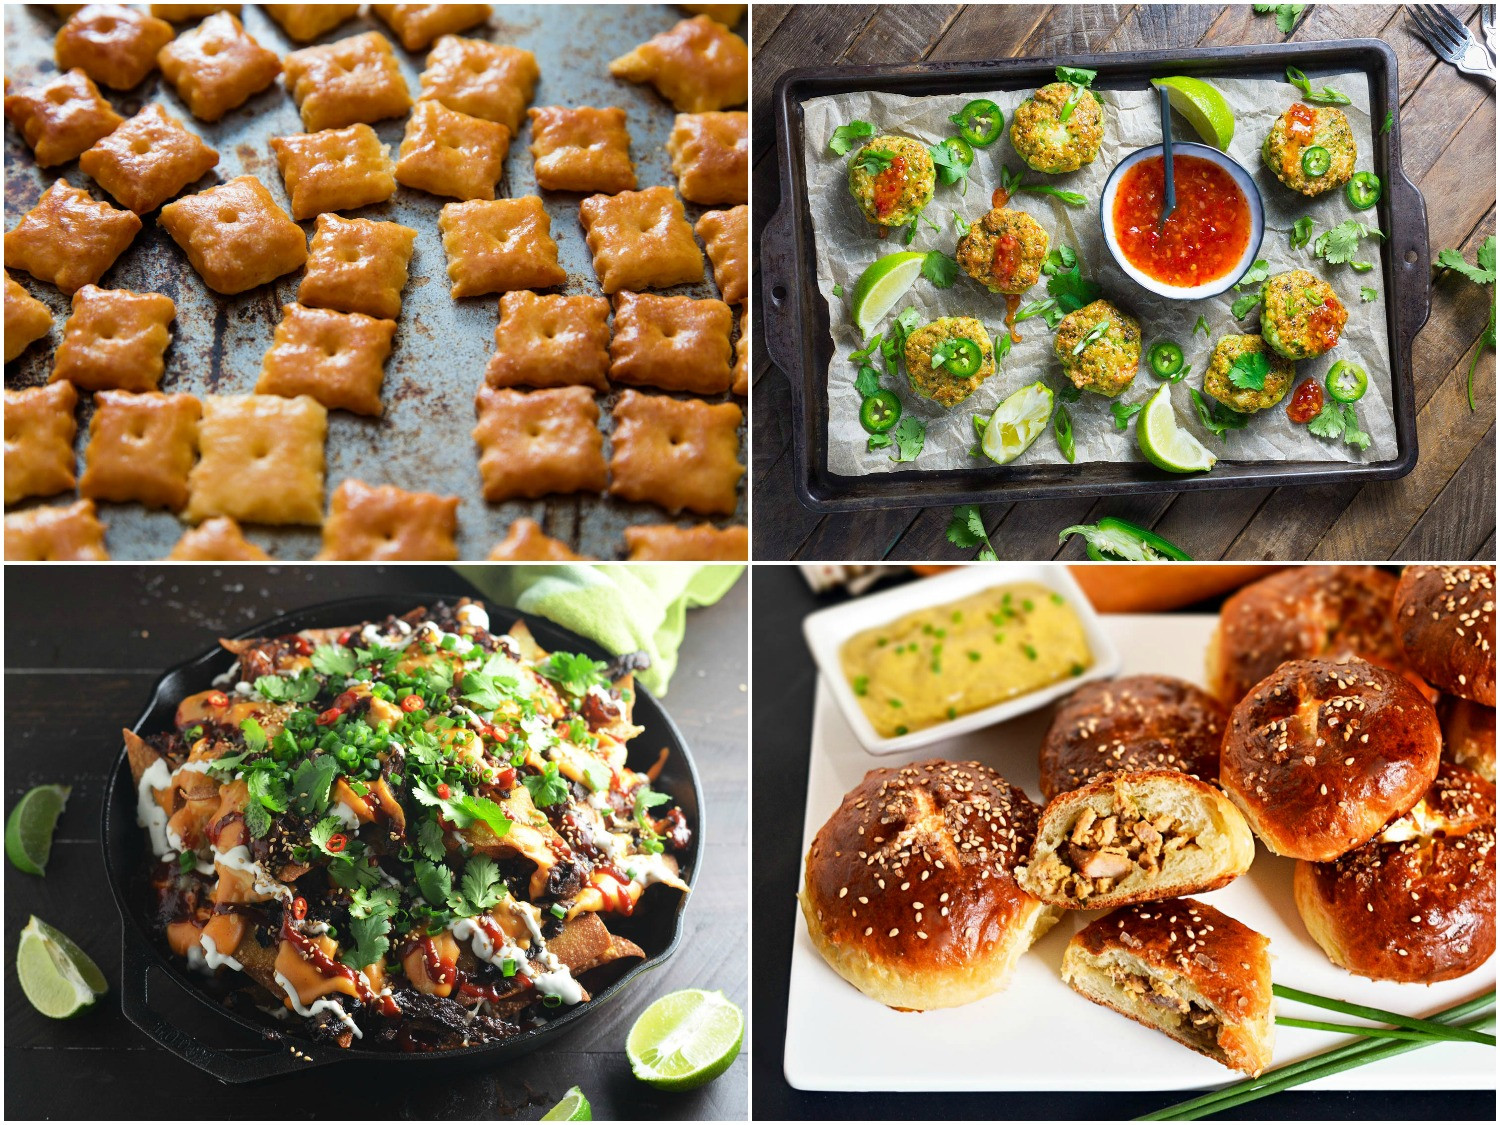 Easy Super Bowl Party Recipes
 24 Super Bowl Snacks to Kick f Your Party